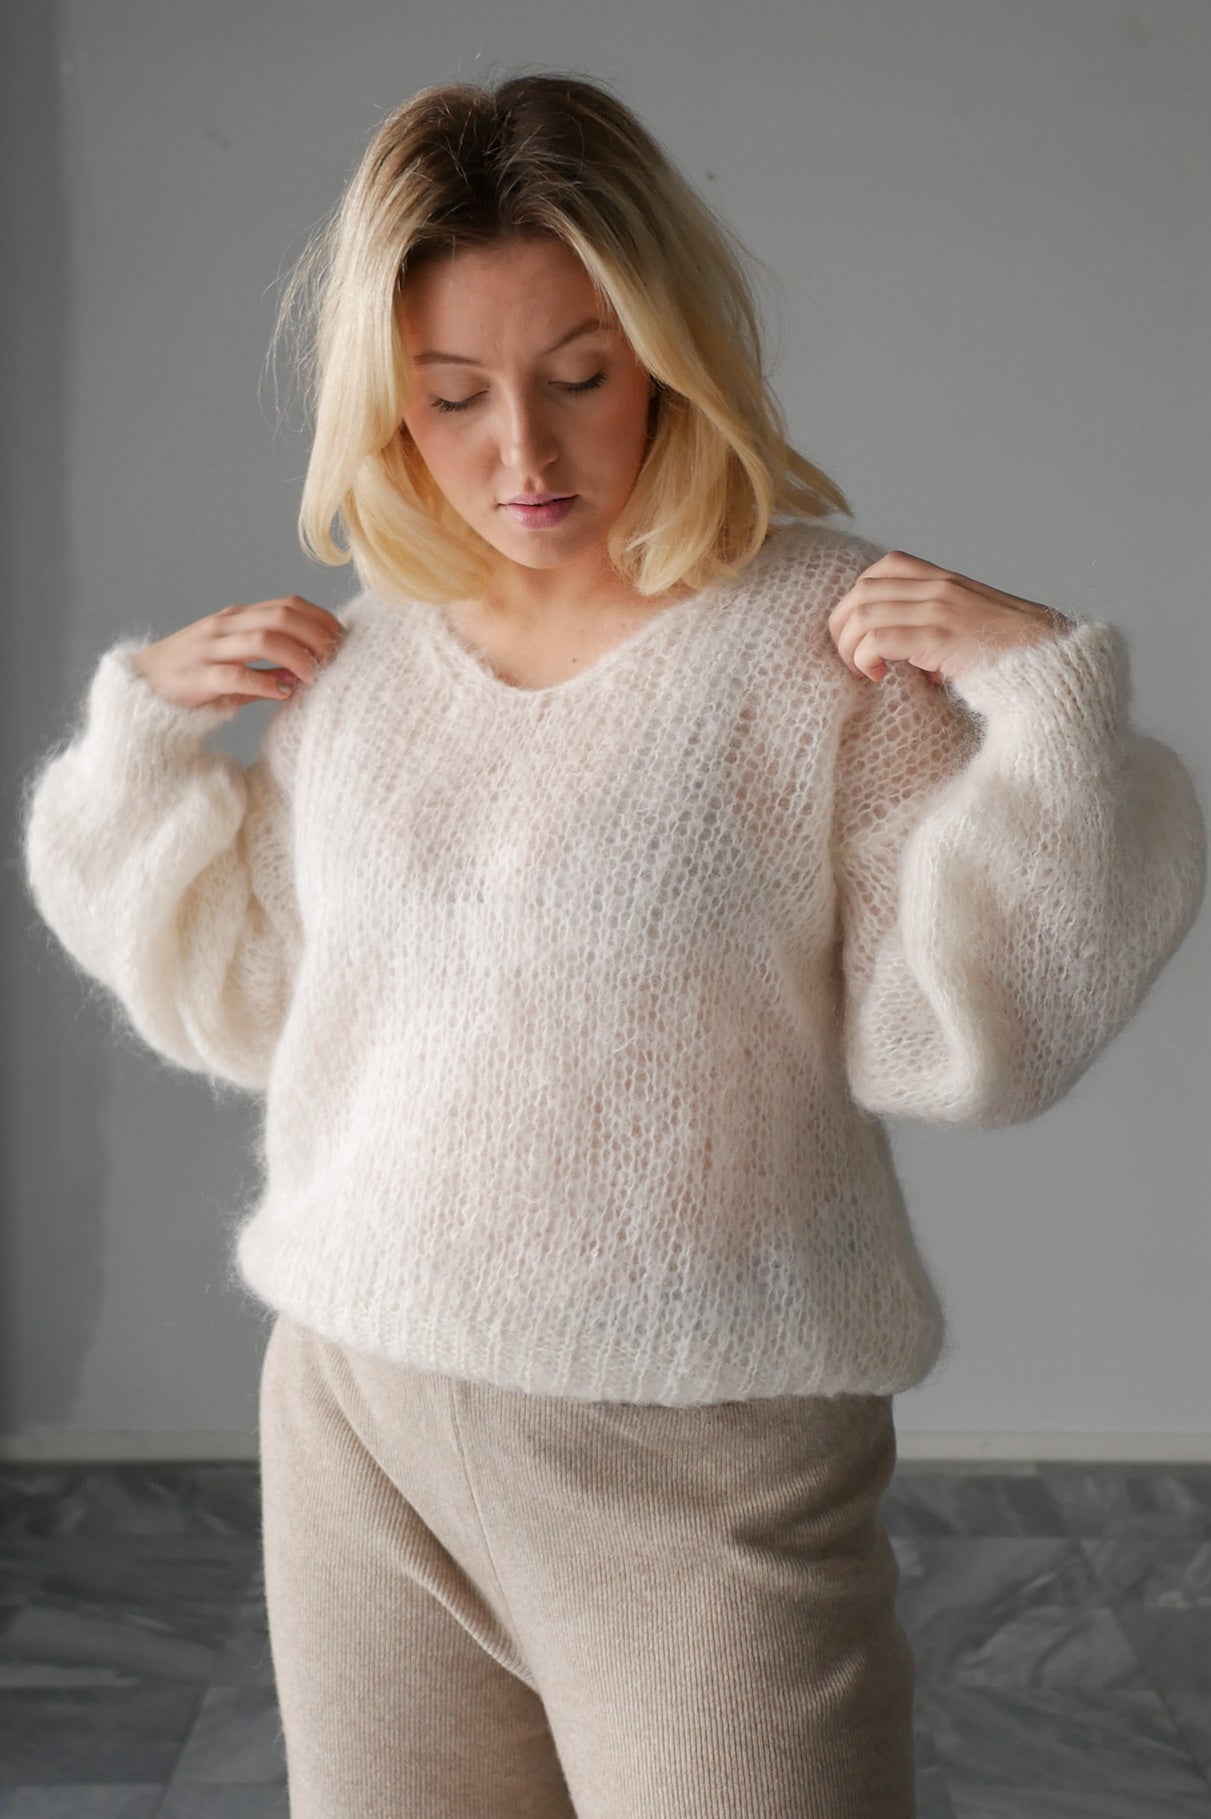 Americandreams Milana LS mohair knit - white – INCH